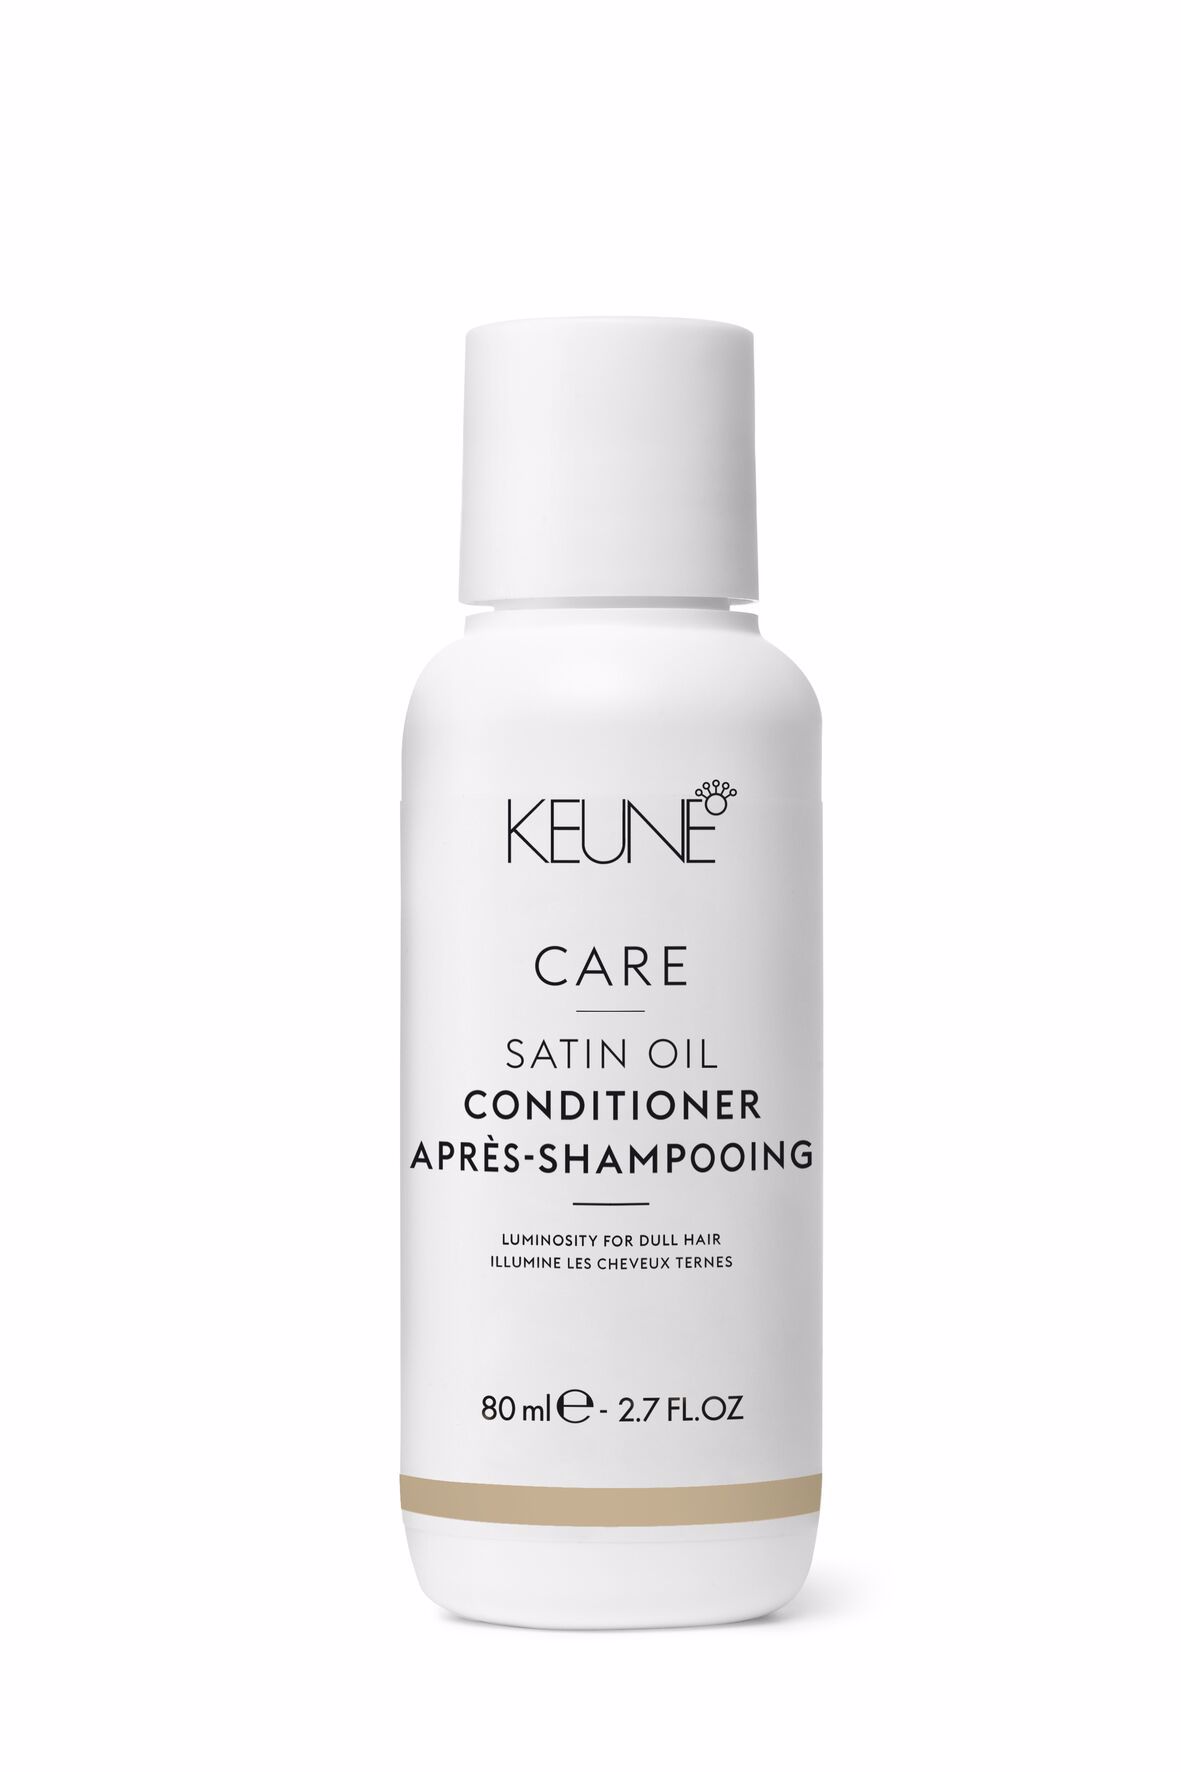 The ideal hair care product for fluffy and dry hair is Satin Oil Conditioner. With its innovative, lightweight formula, it leaves your hair fresh, healthy, and shiny. Available on keune.ch.